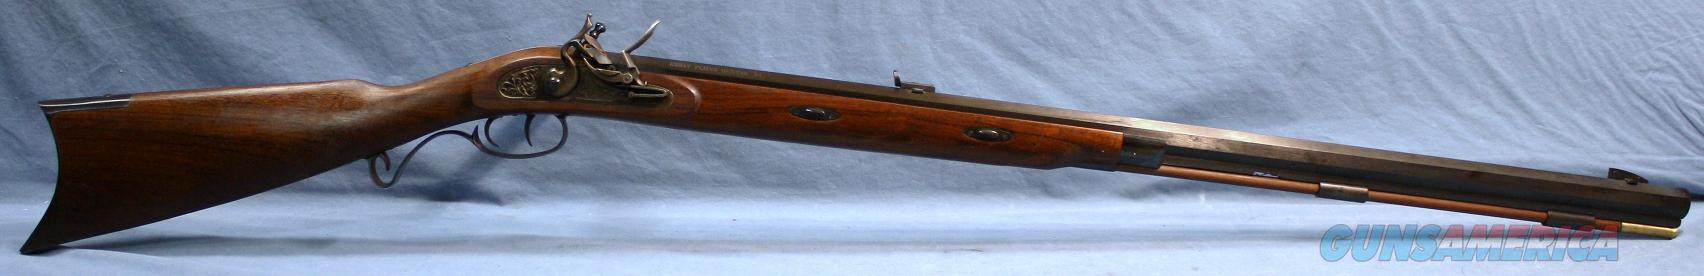 lyman great plains rifle replacement stock